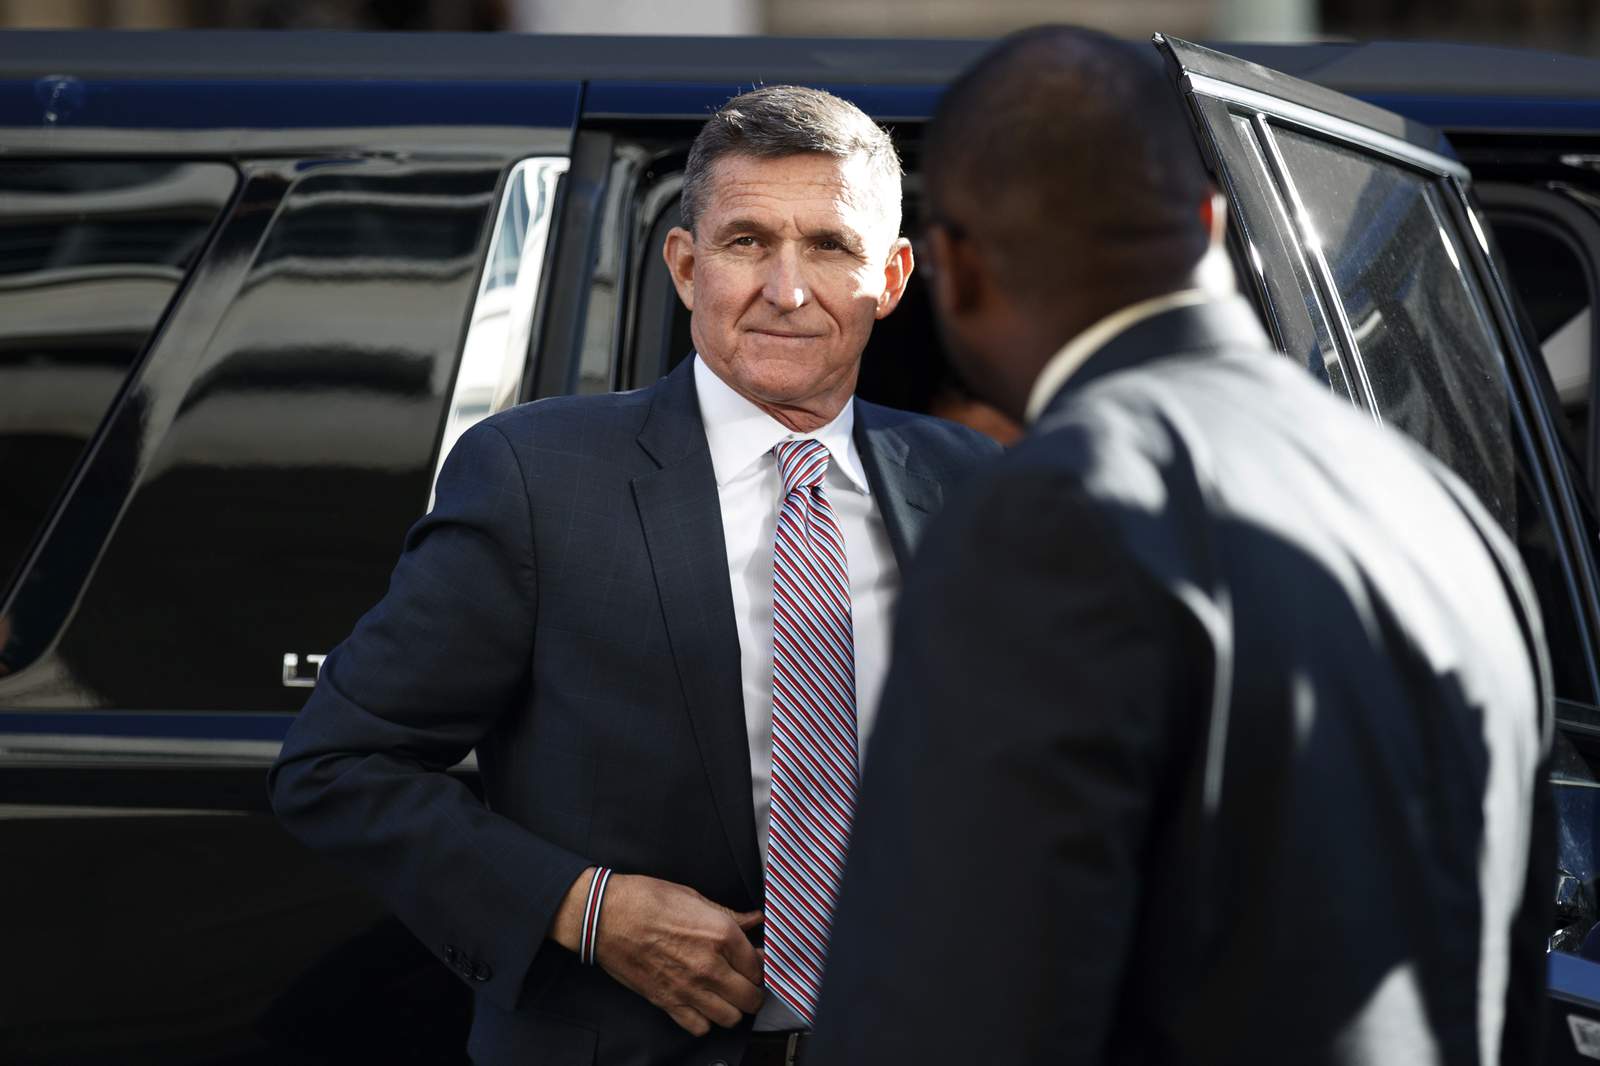 Court hears arguments on whether to dismiss Flynn case